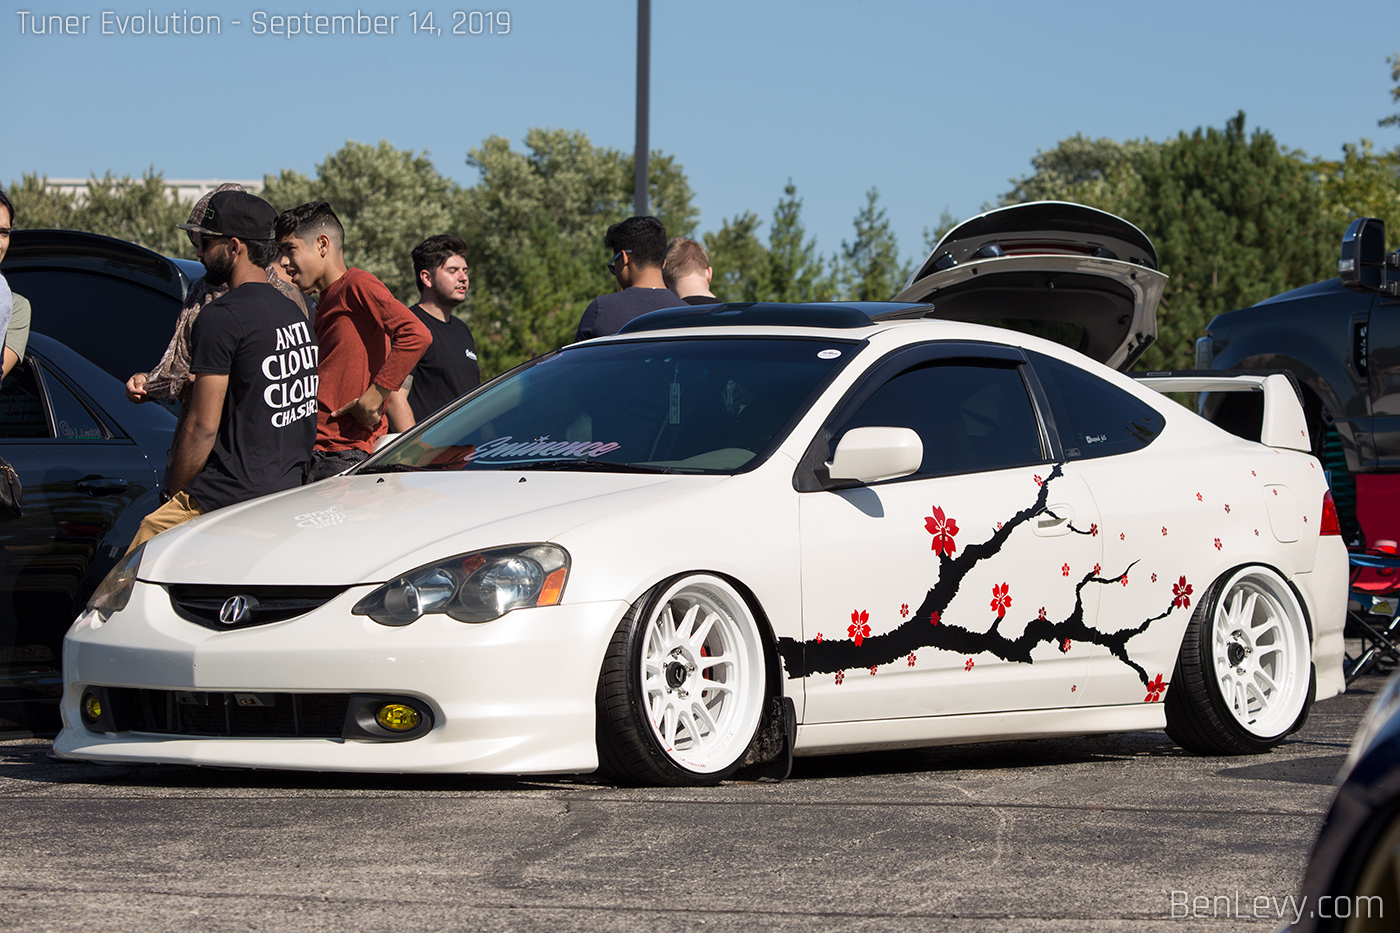 Acura RSX with cherry blossom graphics